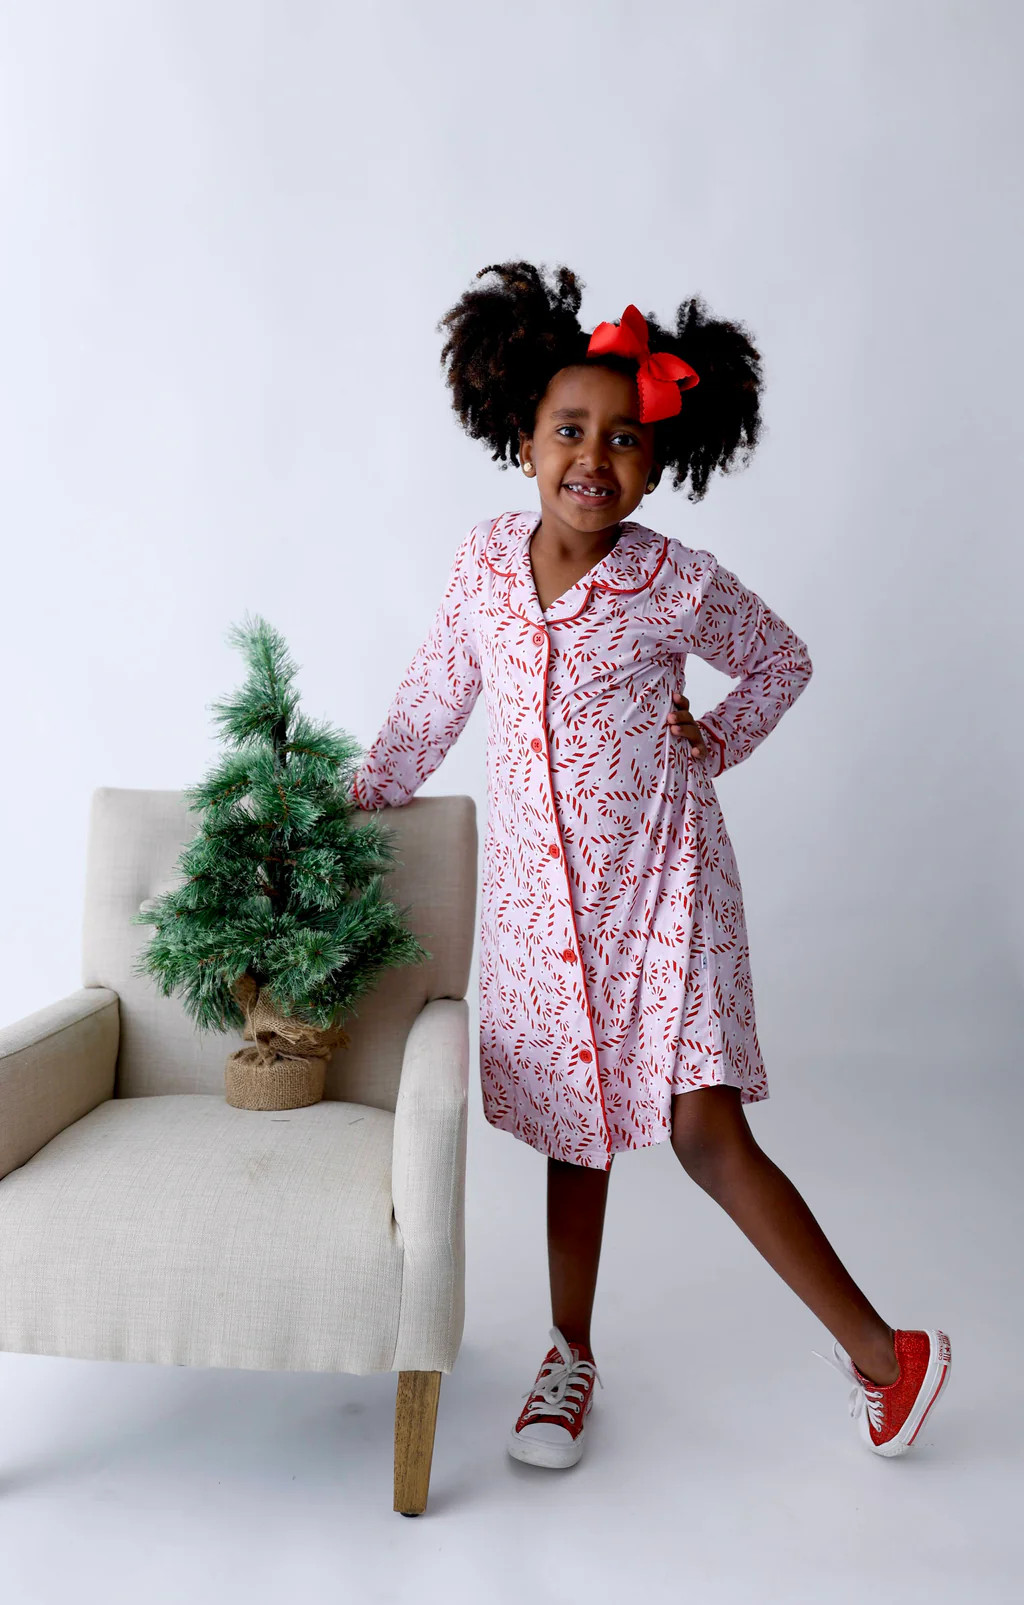 CANDY CANE GIRL'S DREAM GOWN | DREAM BIG LITTLE CO